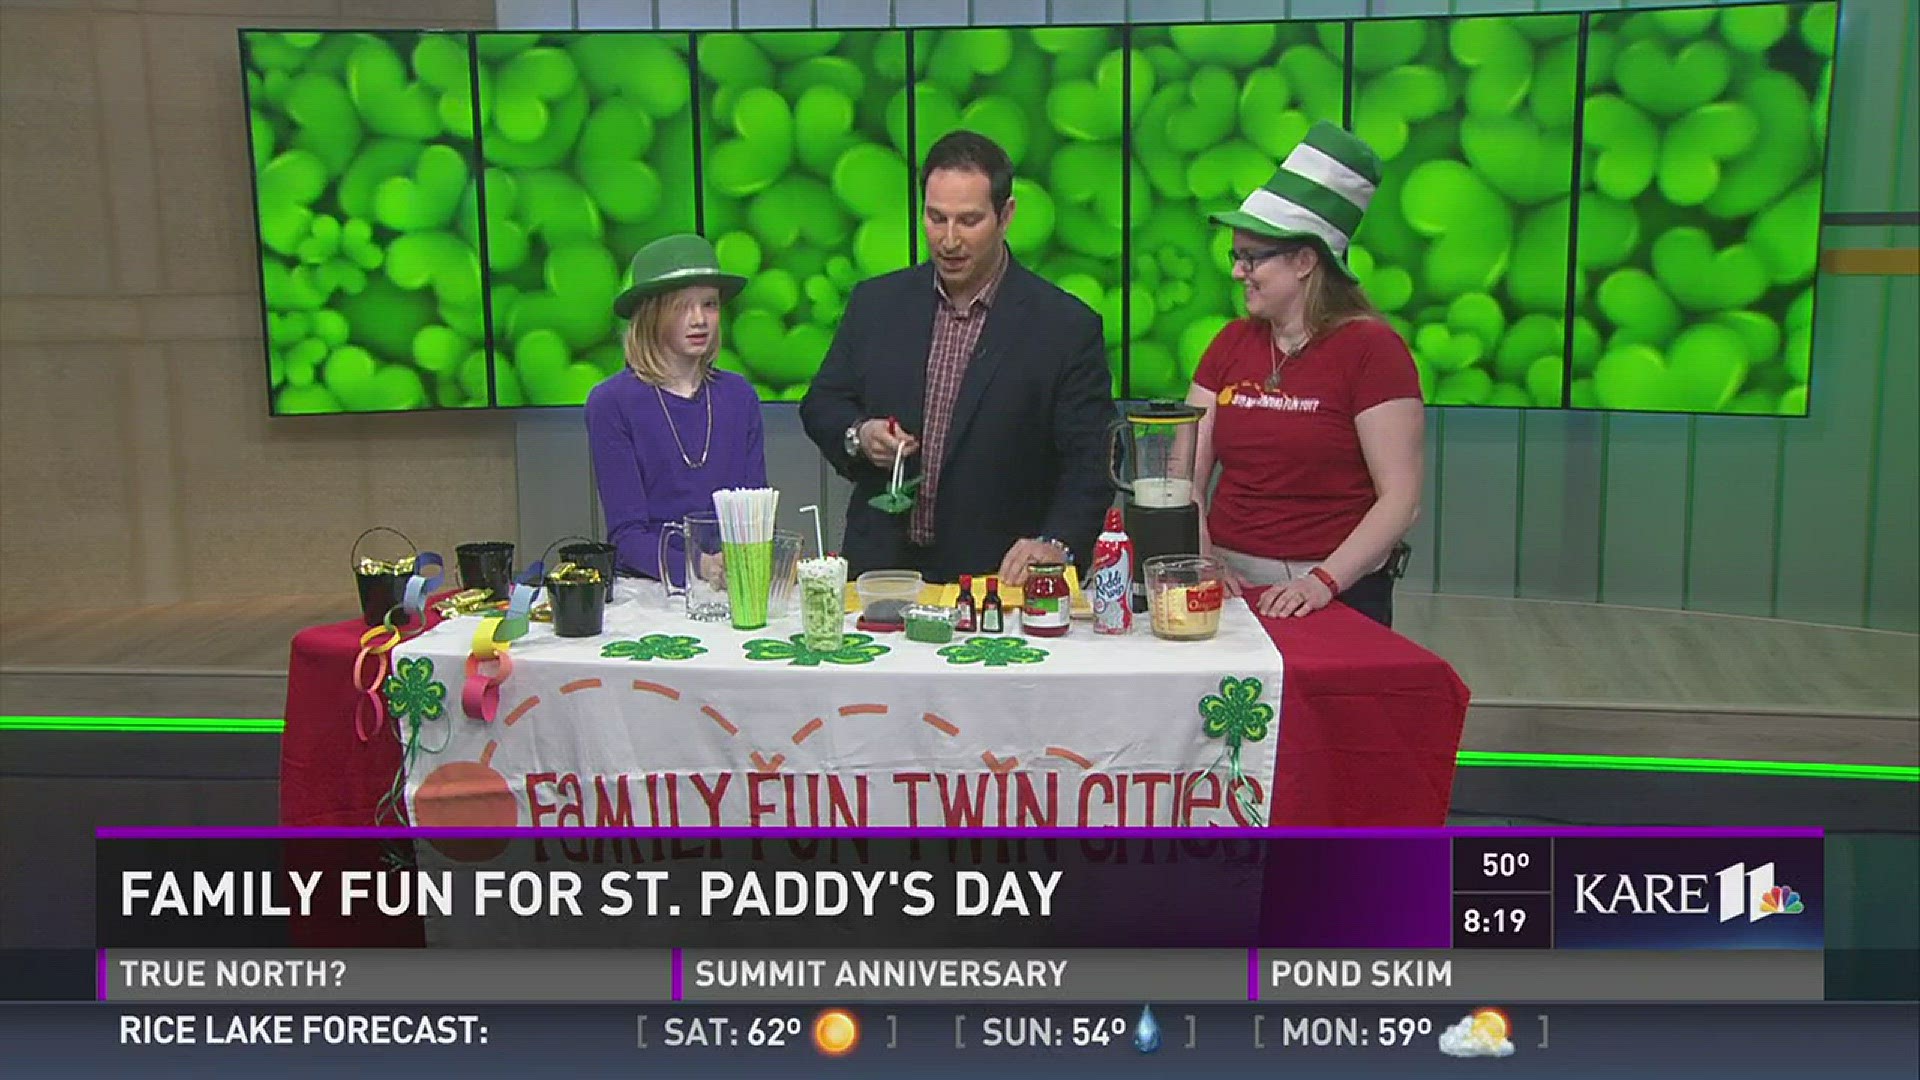 Family fun for St. Paddy's Day